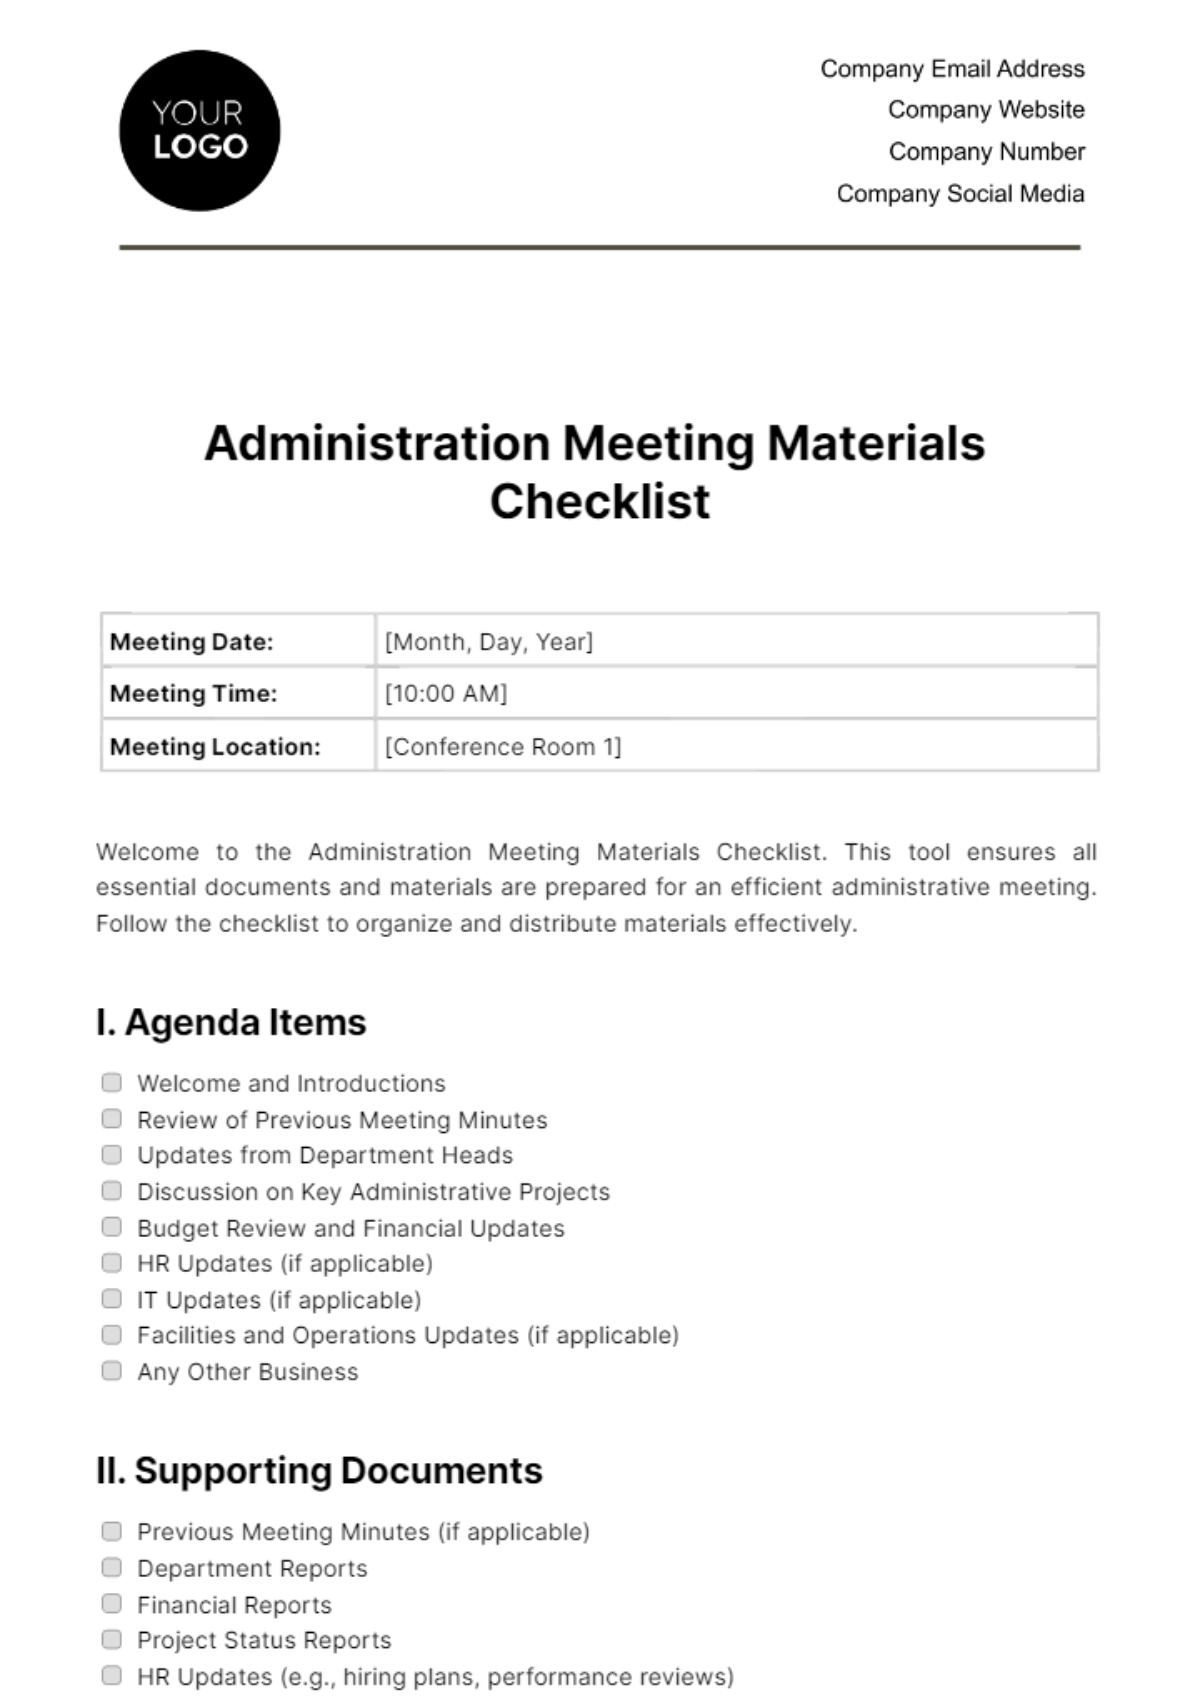 Free Administration Meeting Materials Checklist Template